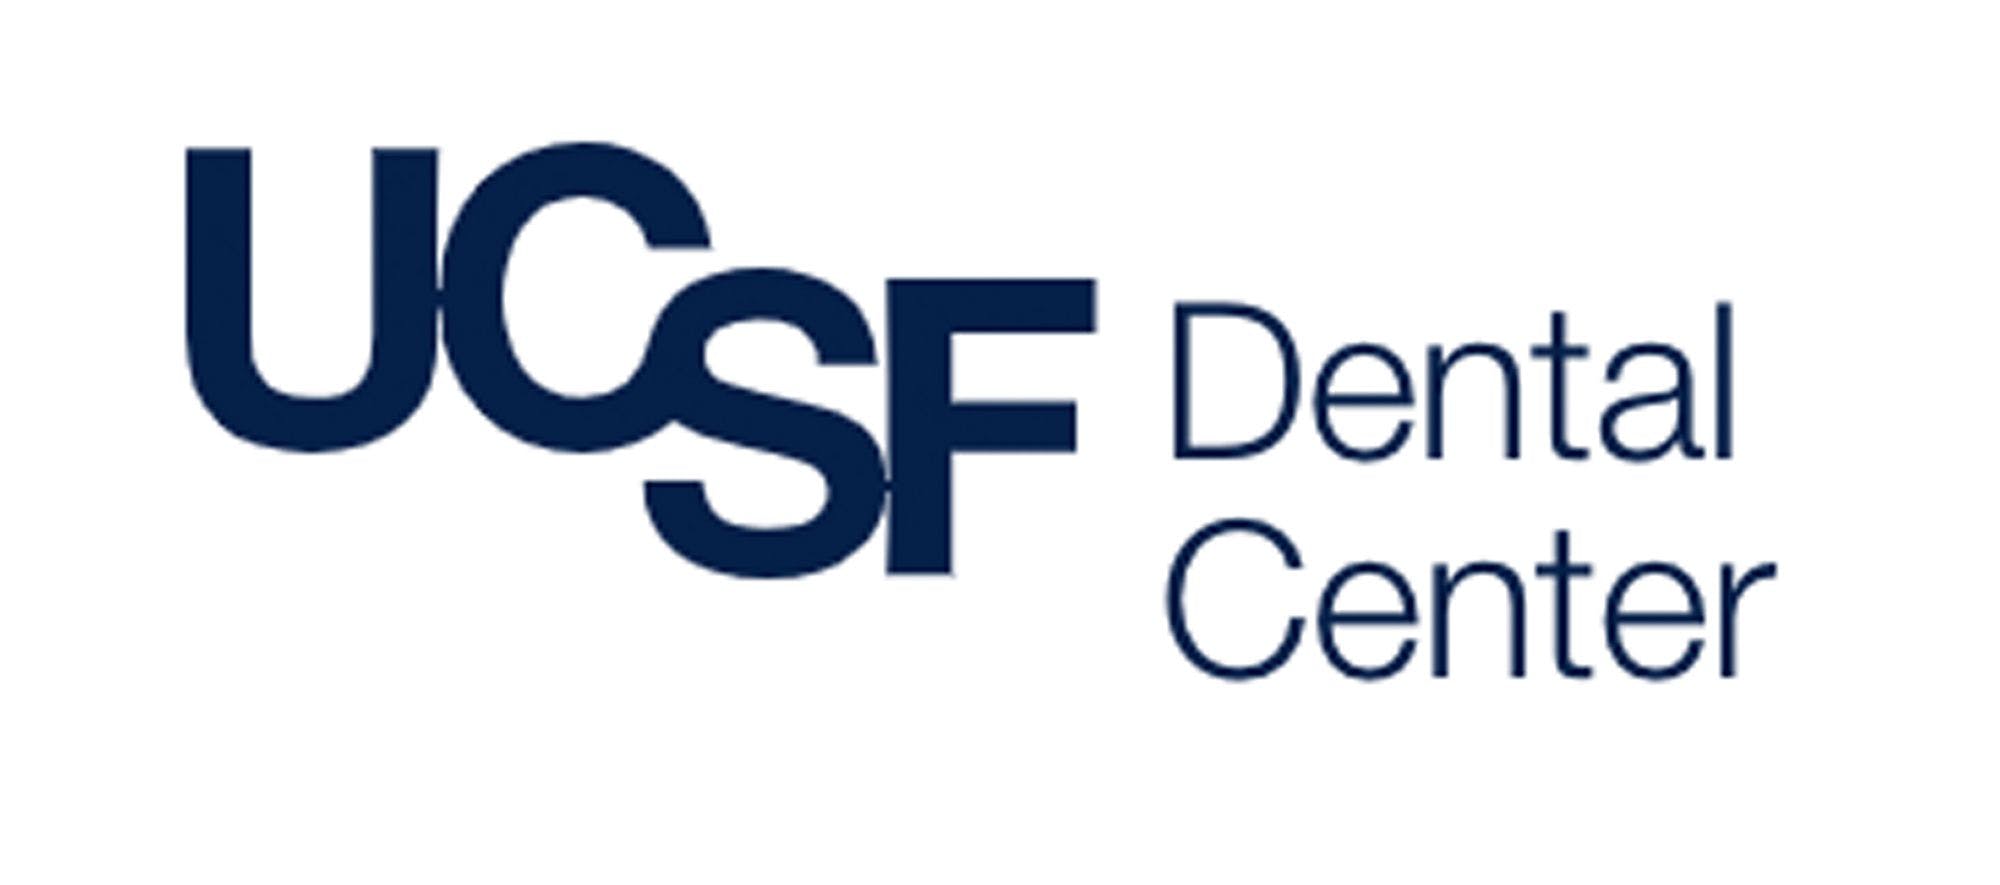 University of California San Francisco is the First to Integrate Records Across Medical and Dental